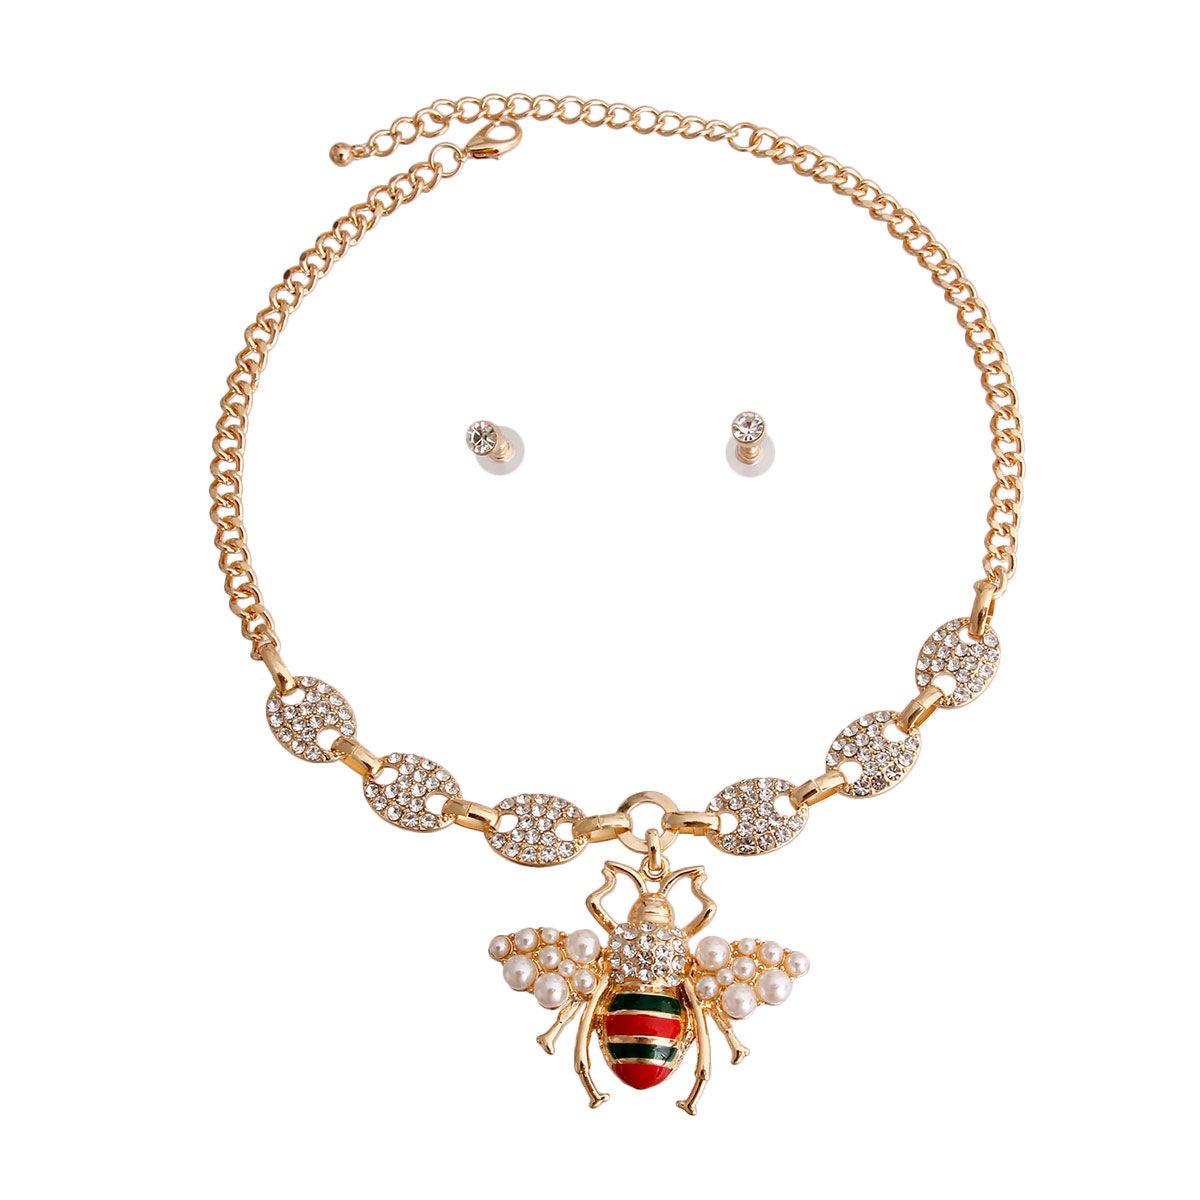 Shop Now: Stylish Rhinestone Bee Necklace Set - Elevate Your Look Today!